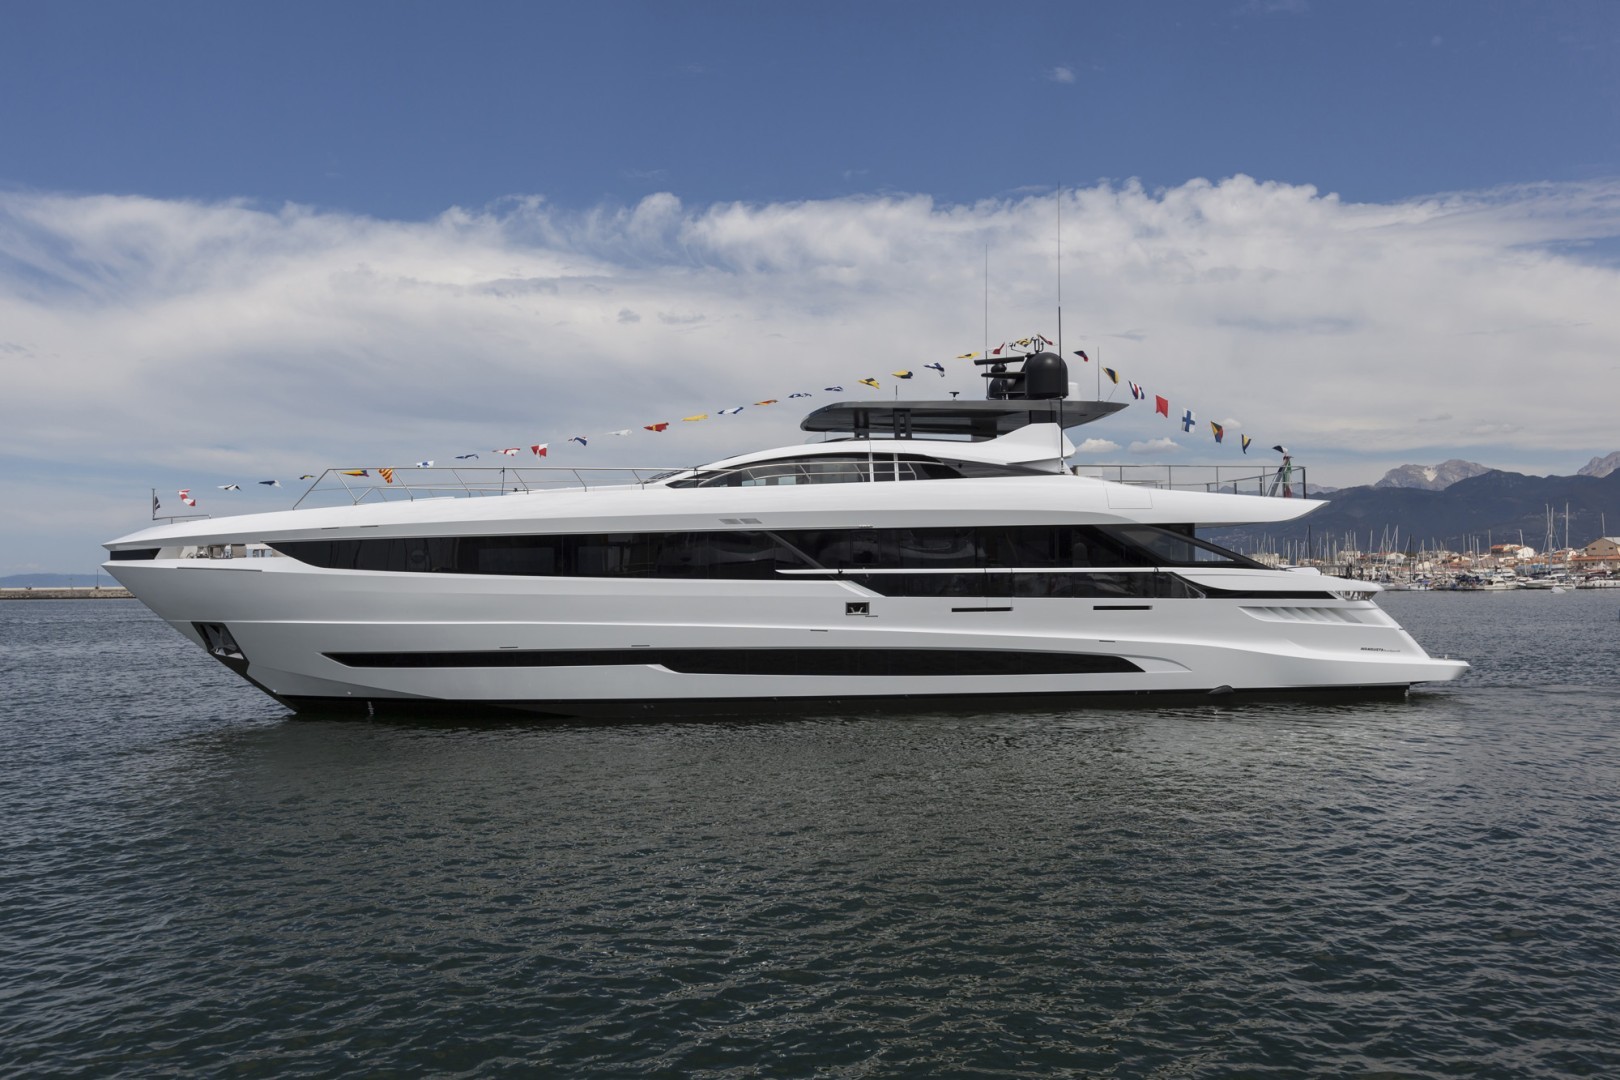 Mangusta GranSport 33 launched